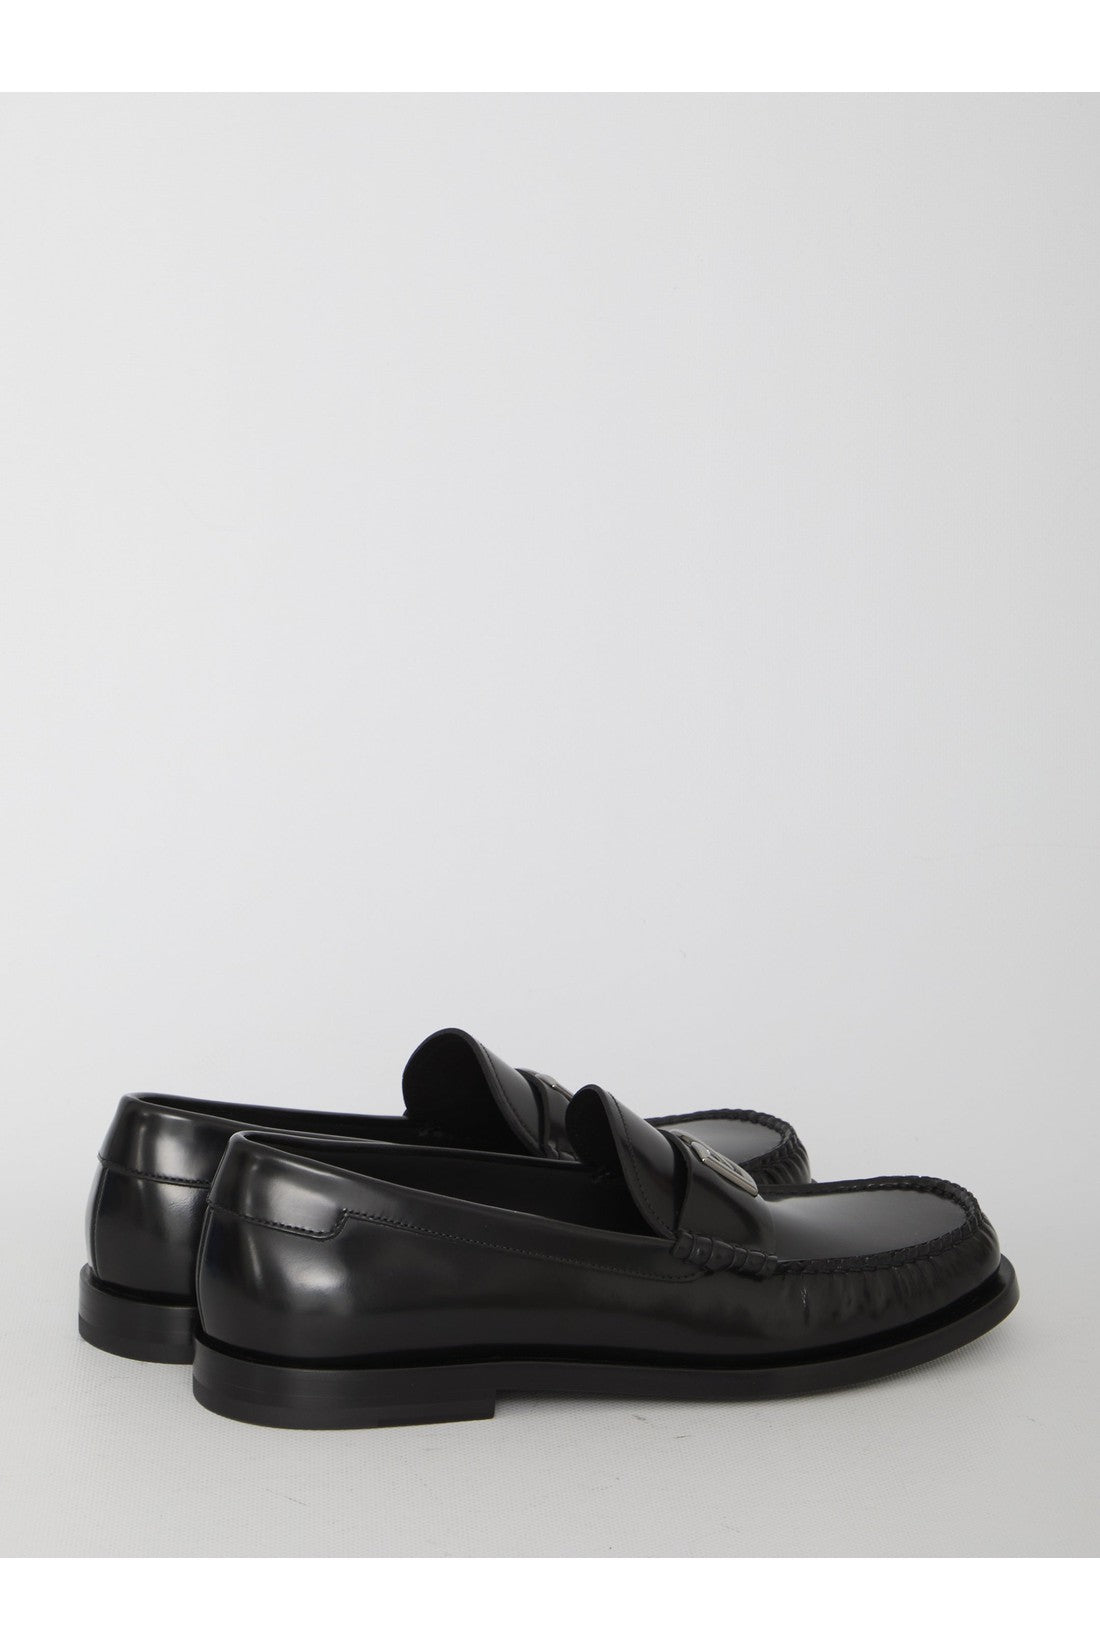 DG loafers